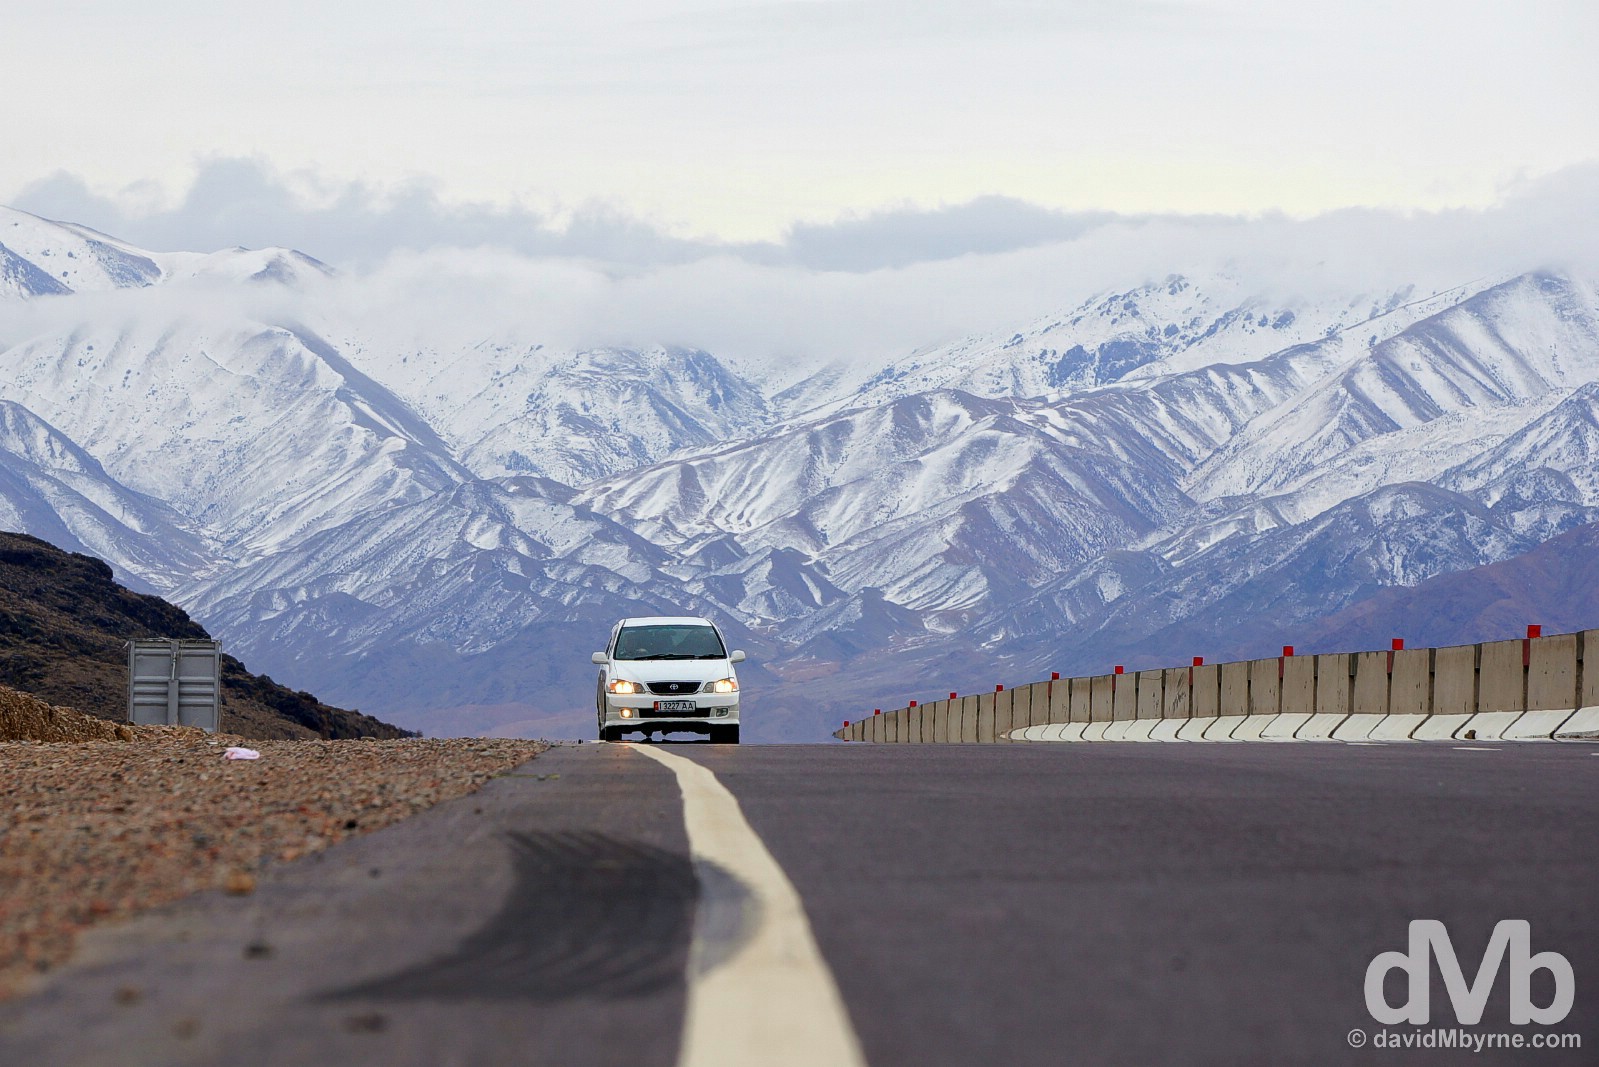 Views of the Zailiysky Alatau range on the A363 road from Bishkek to the lakeside town of Cholpon-Ata in northern Kyrgyzstan. February 25, 2015. 